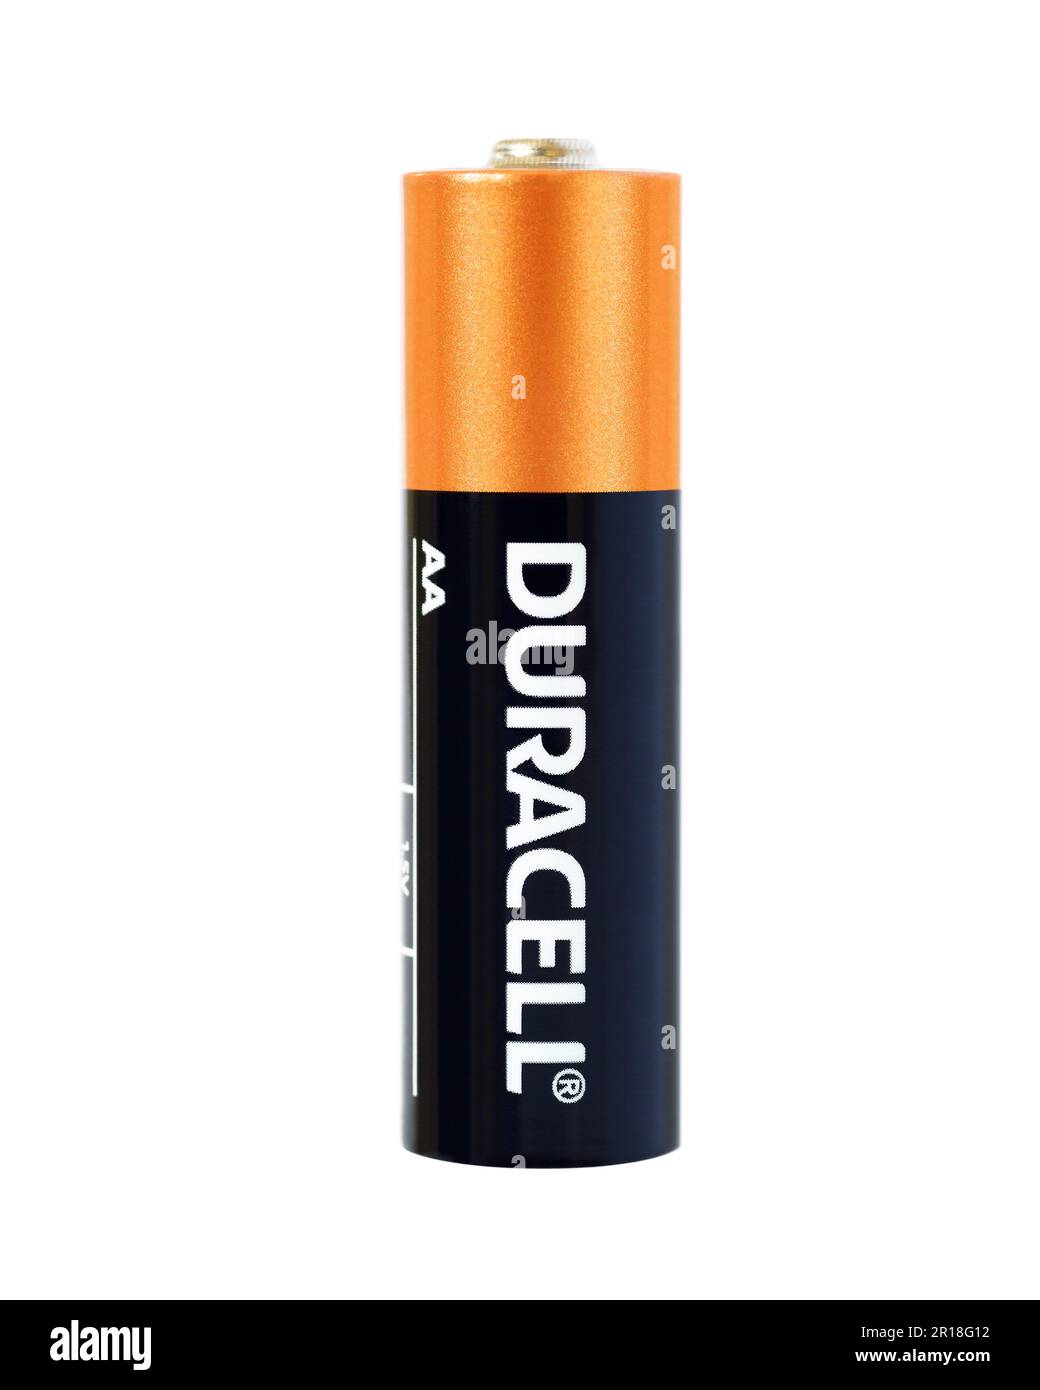 Duracell Battery Stock Photo